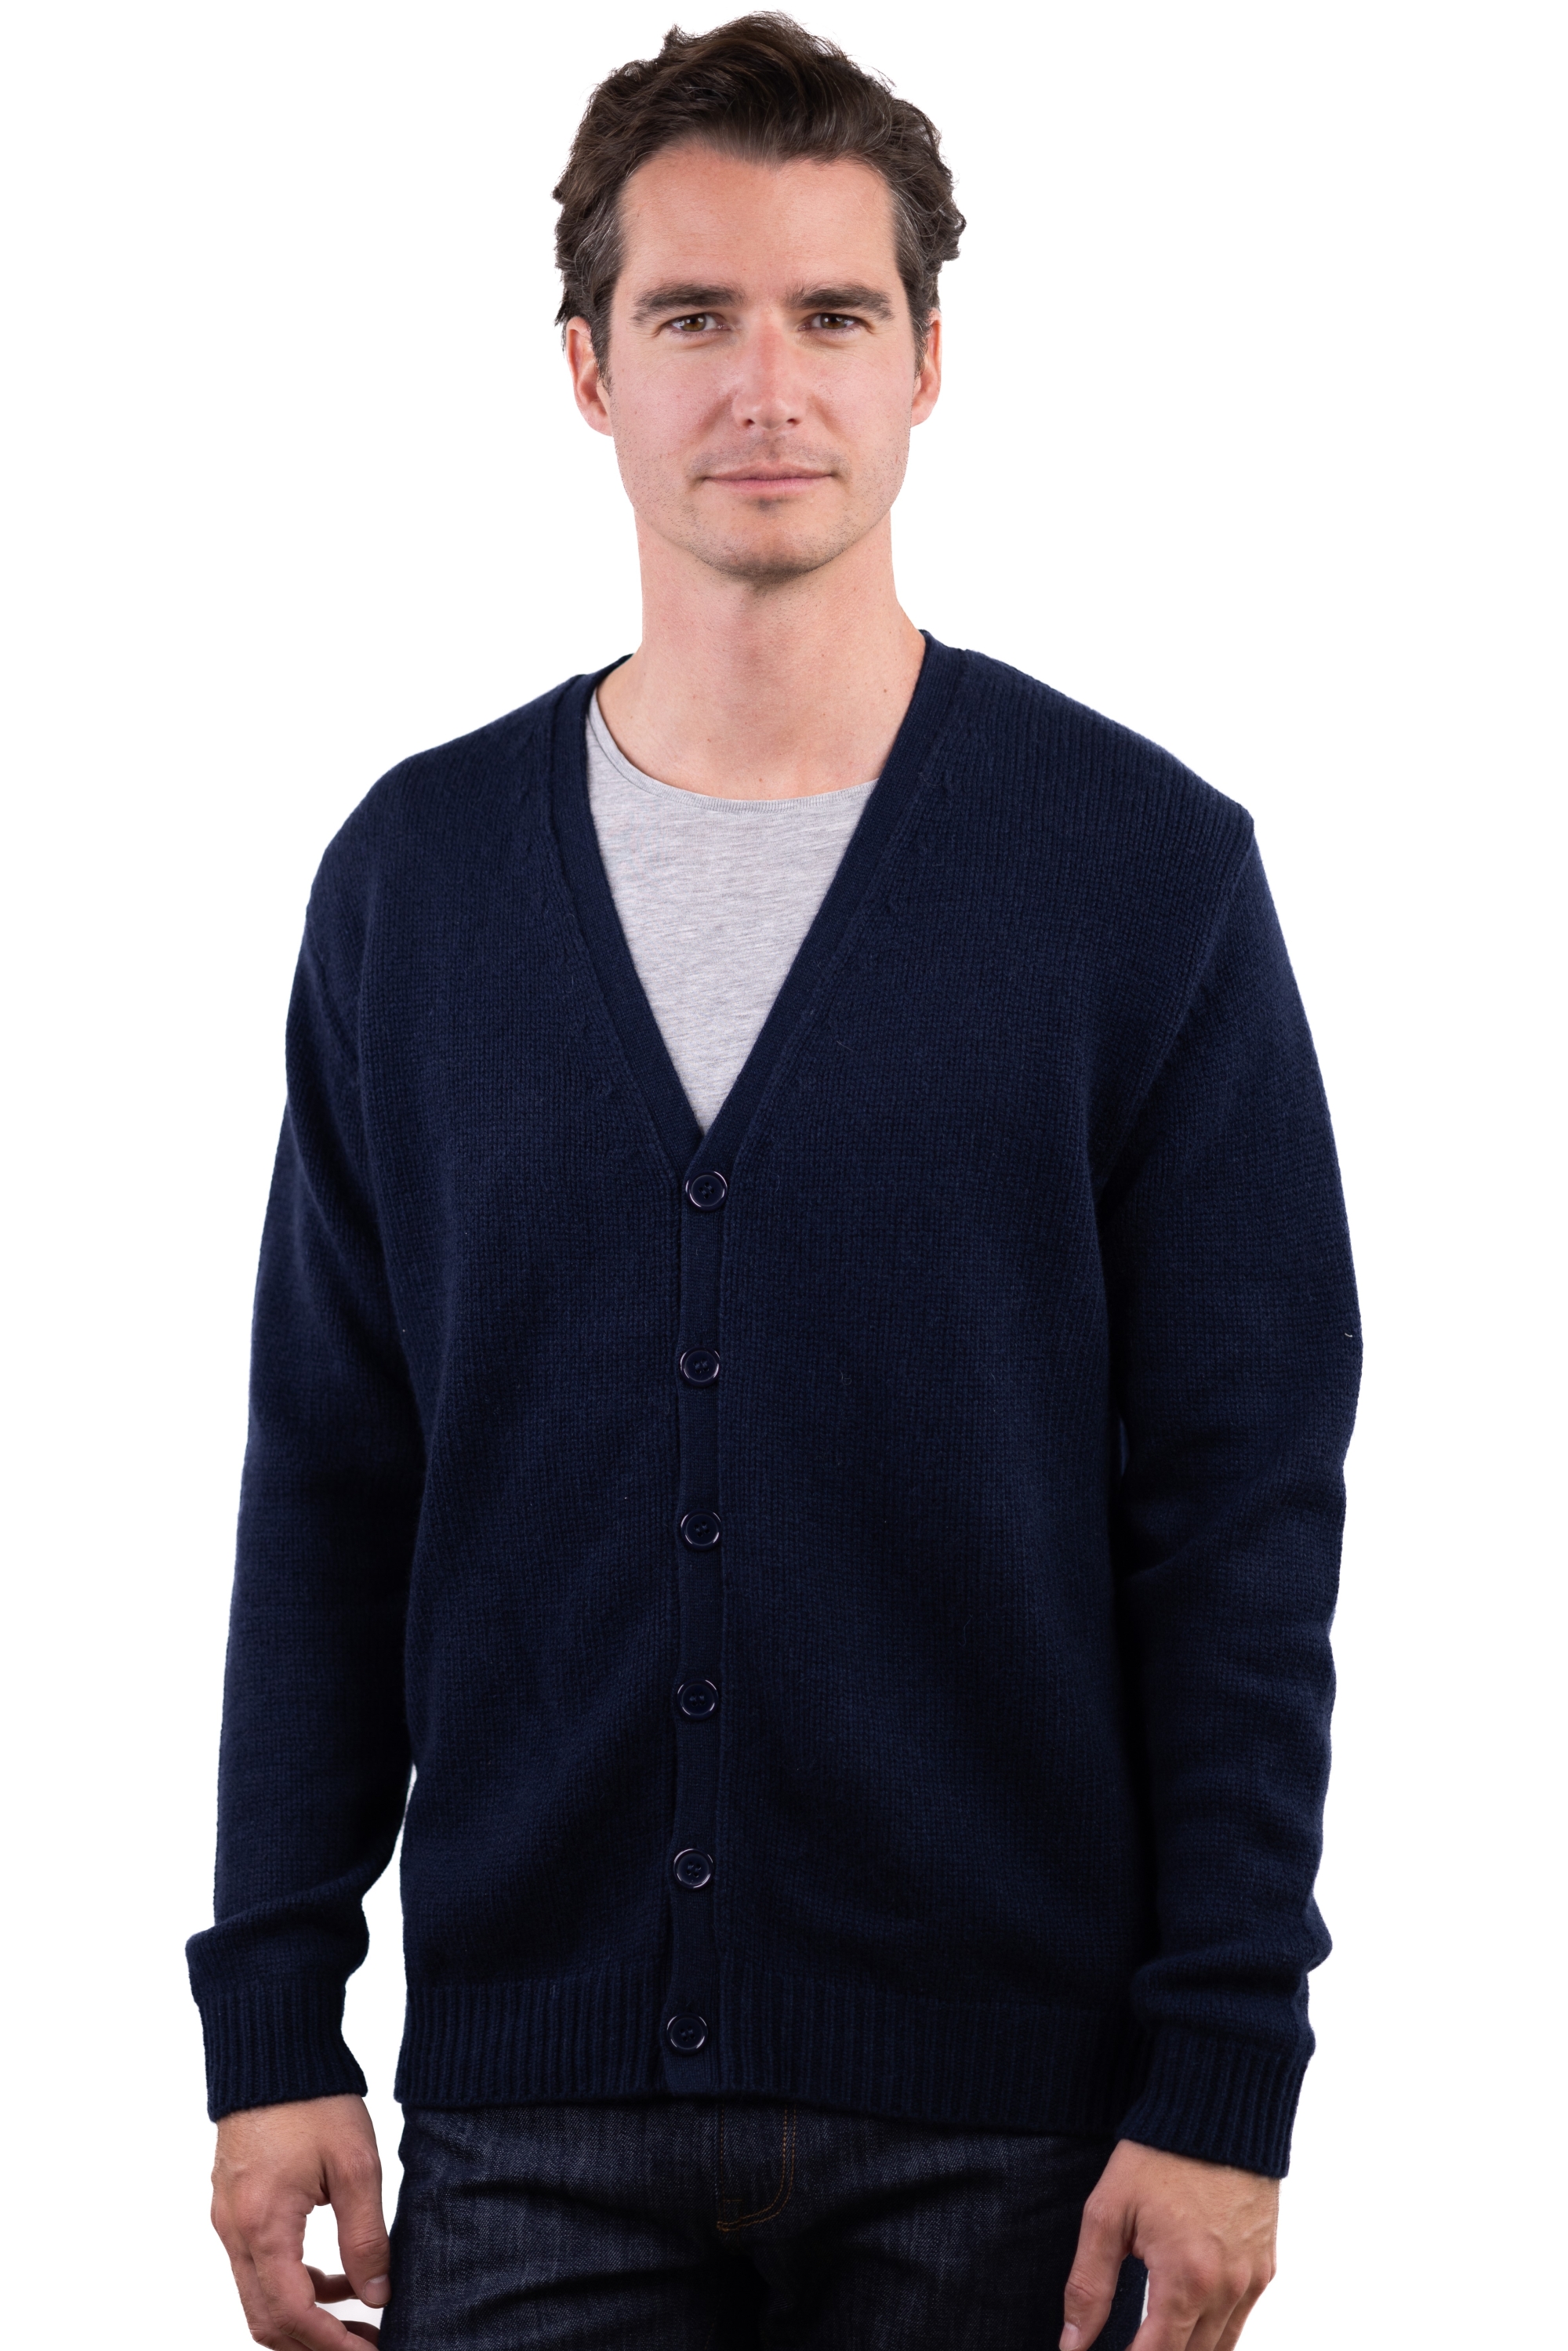 Cachemire pull homme aden marine fonce 4xl